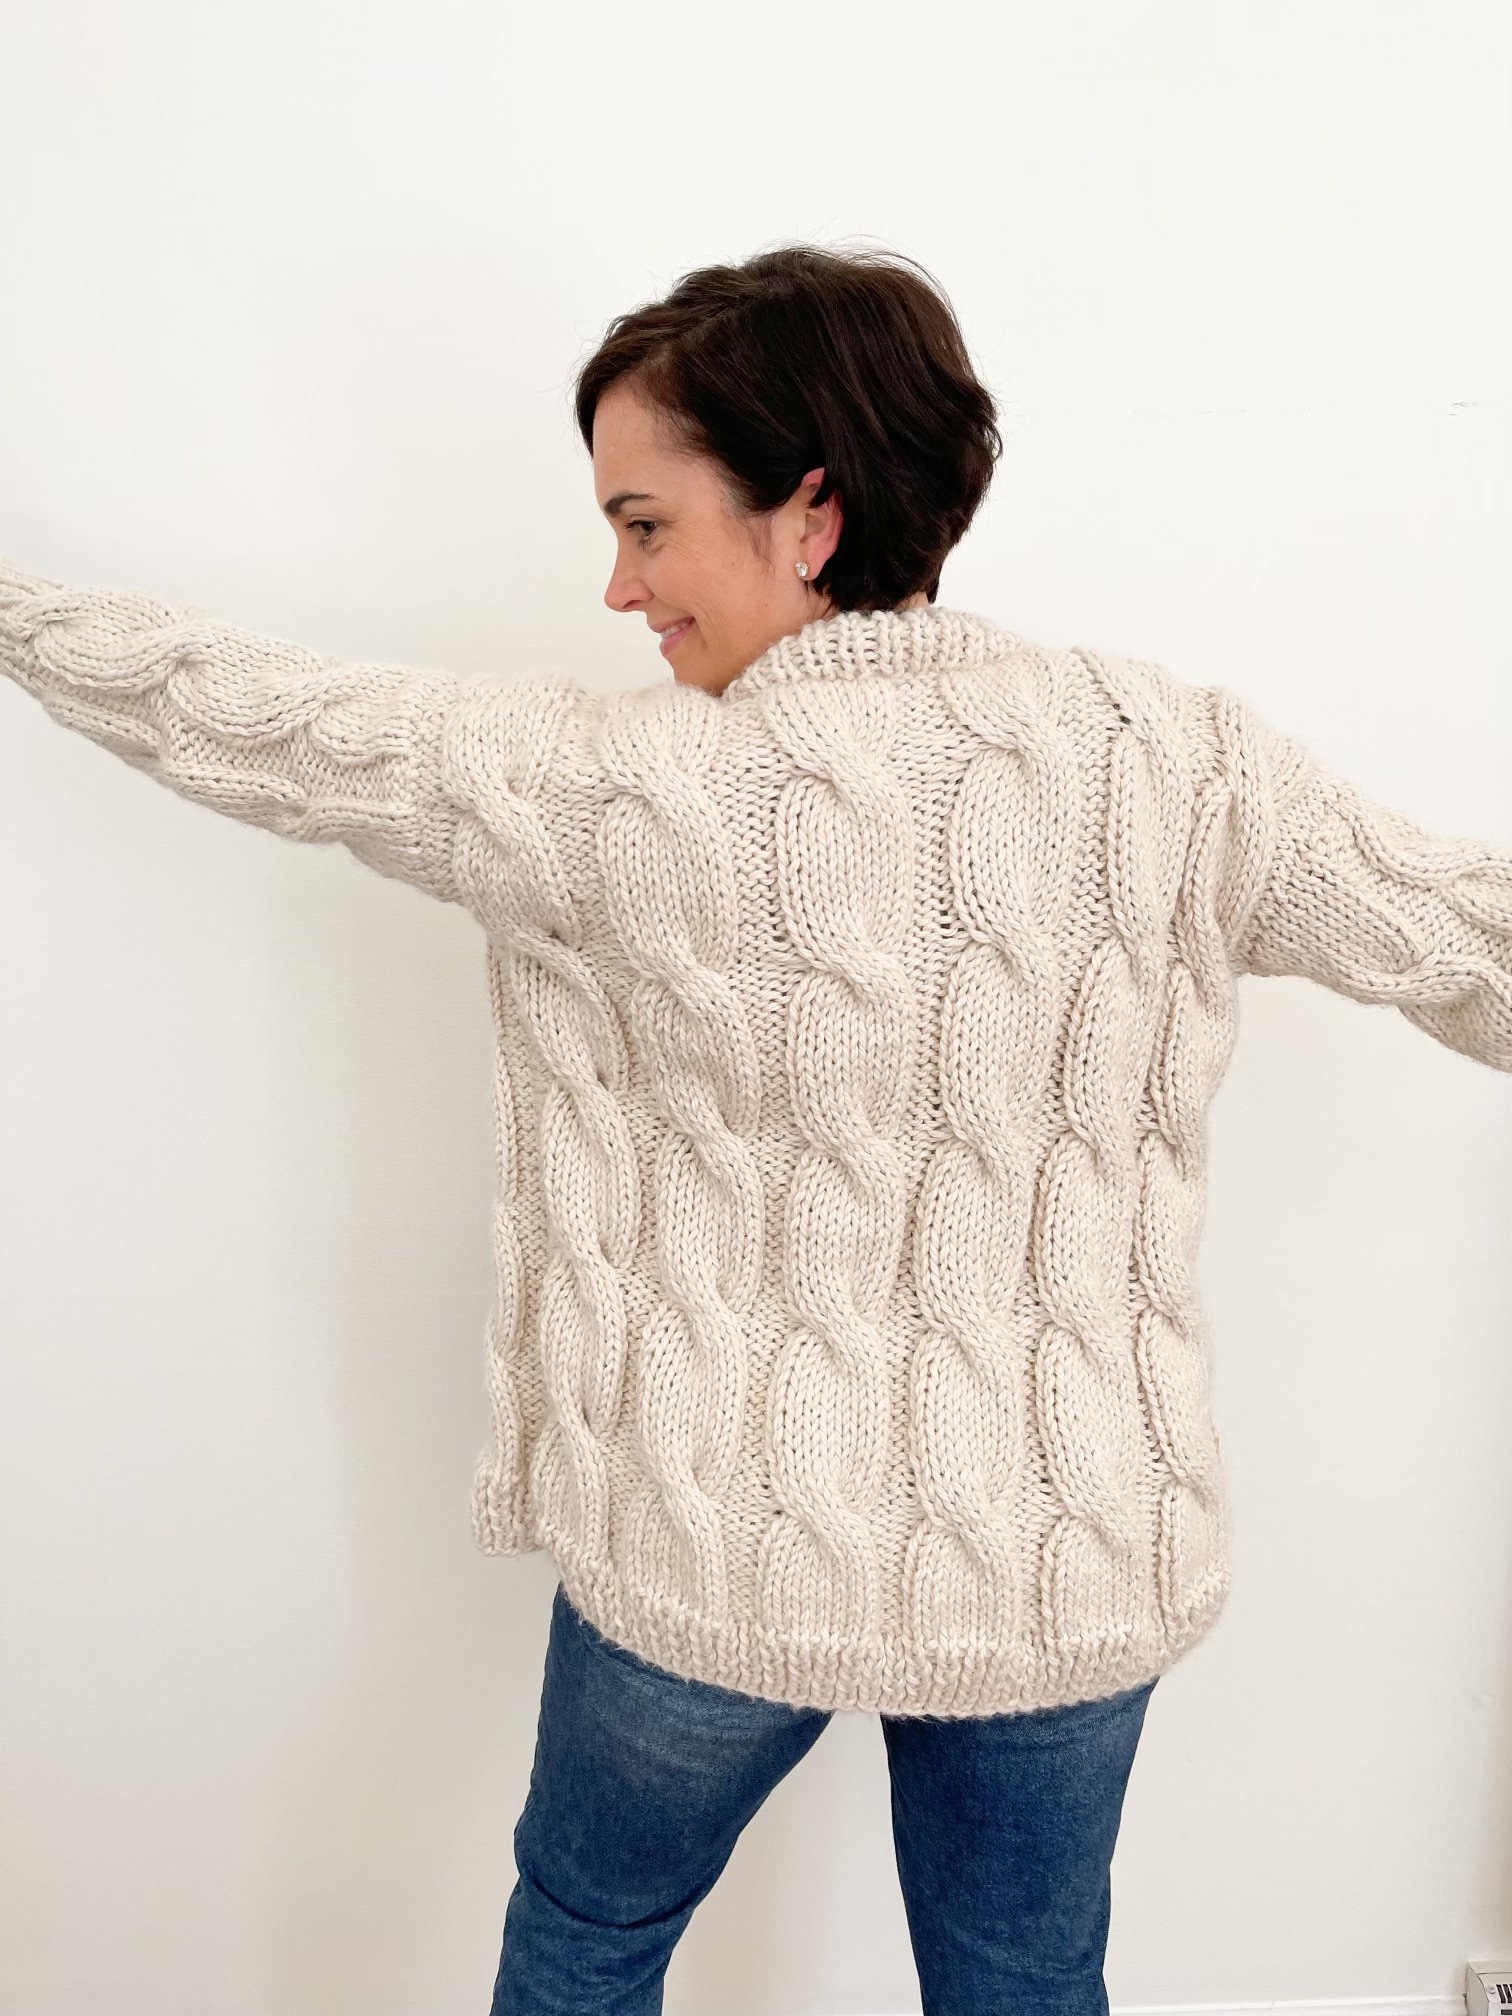 Knit Kit Chunky Cable Knit Jumper Make Your Own Super Chunky Knit Sweater 